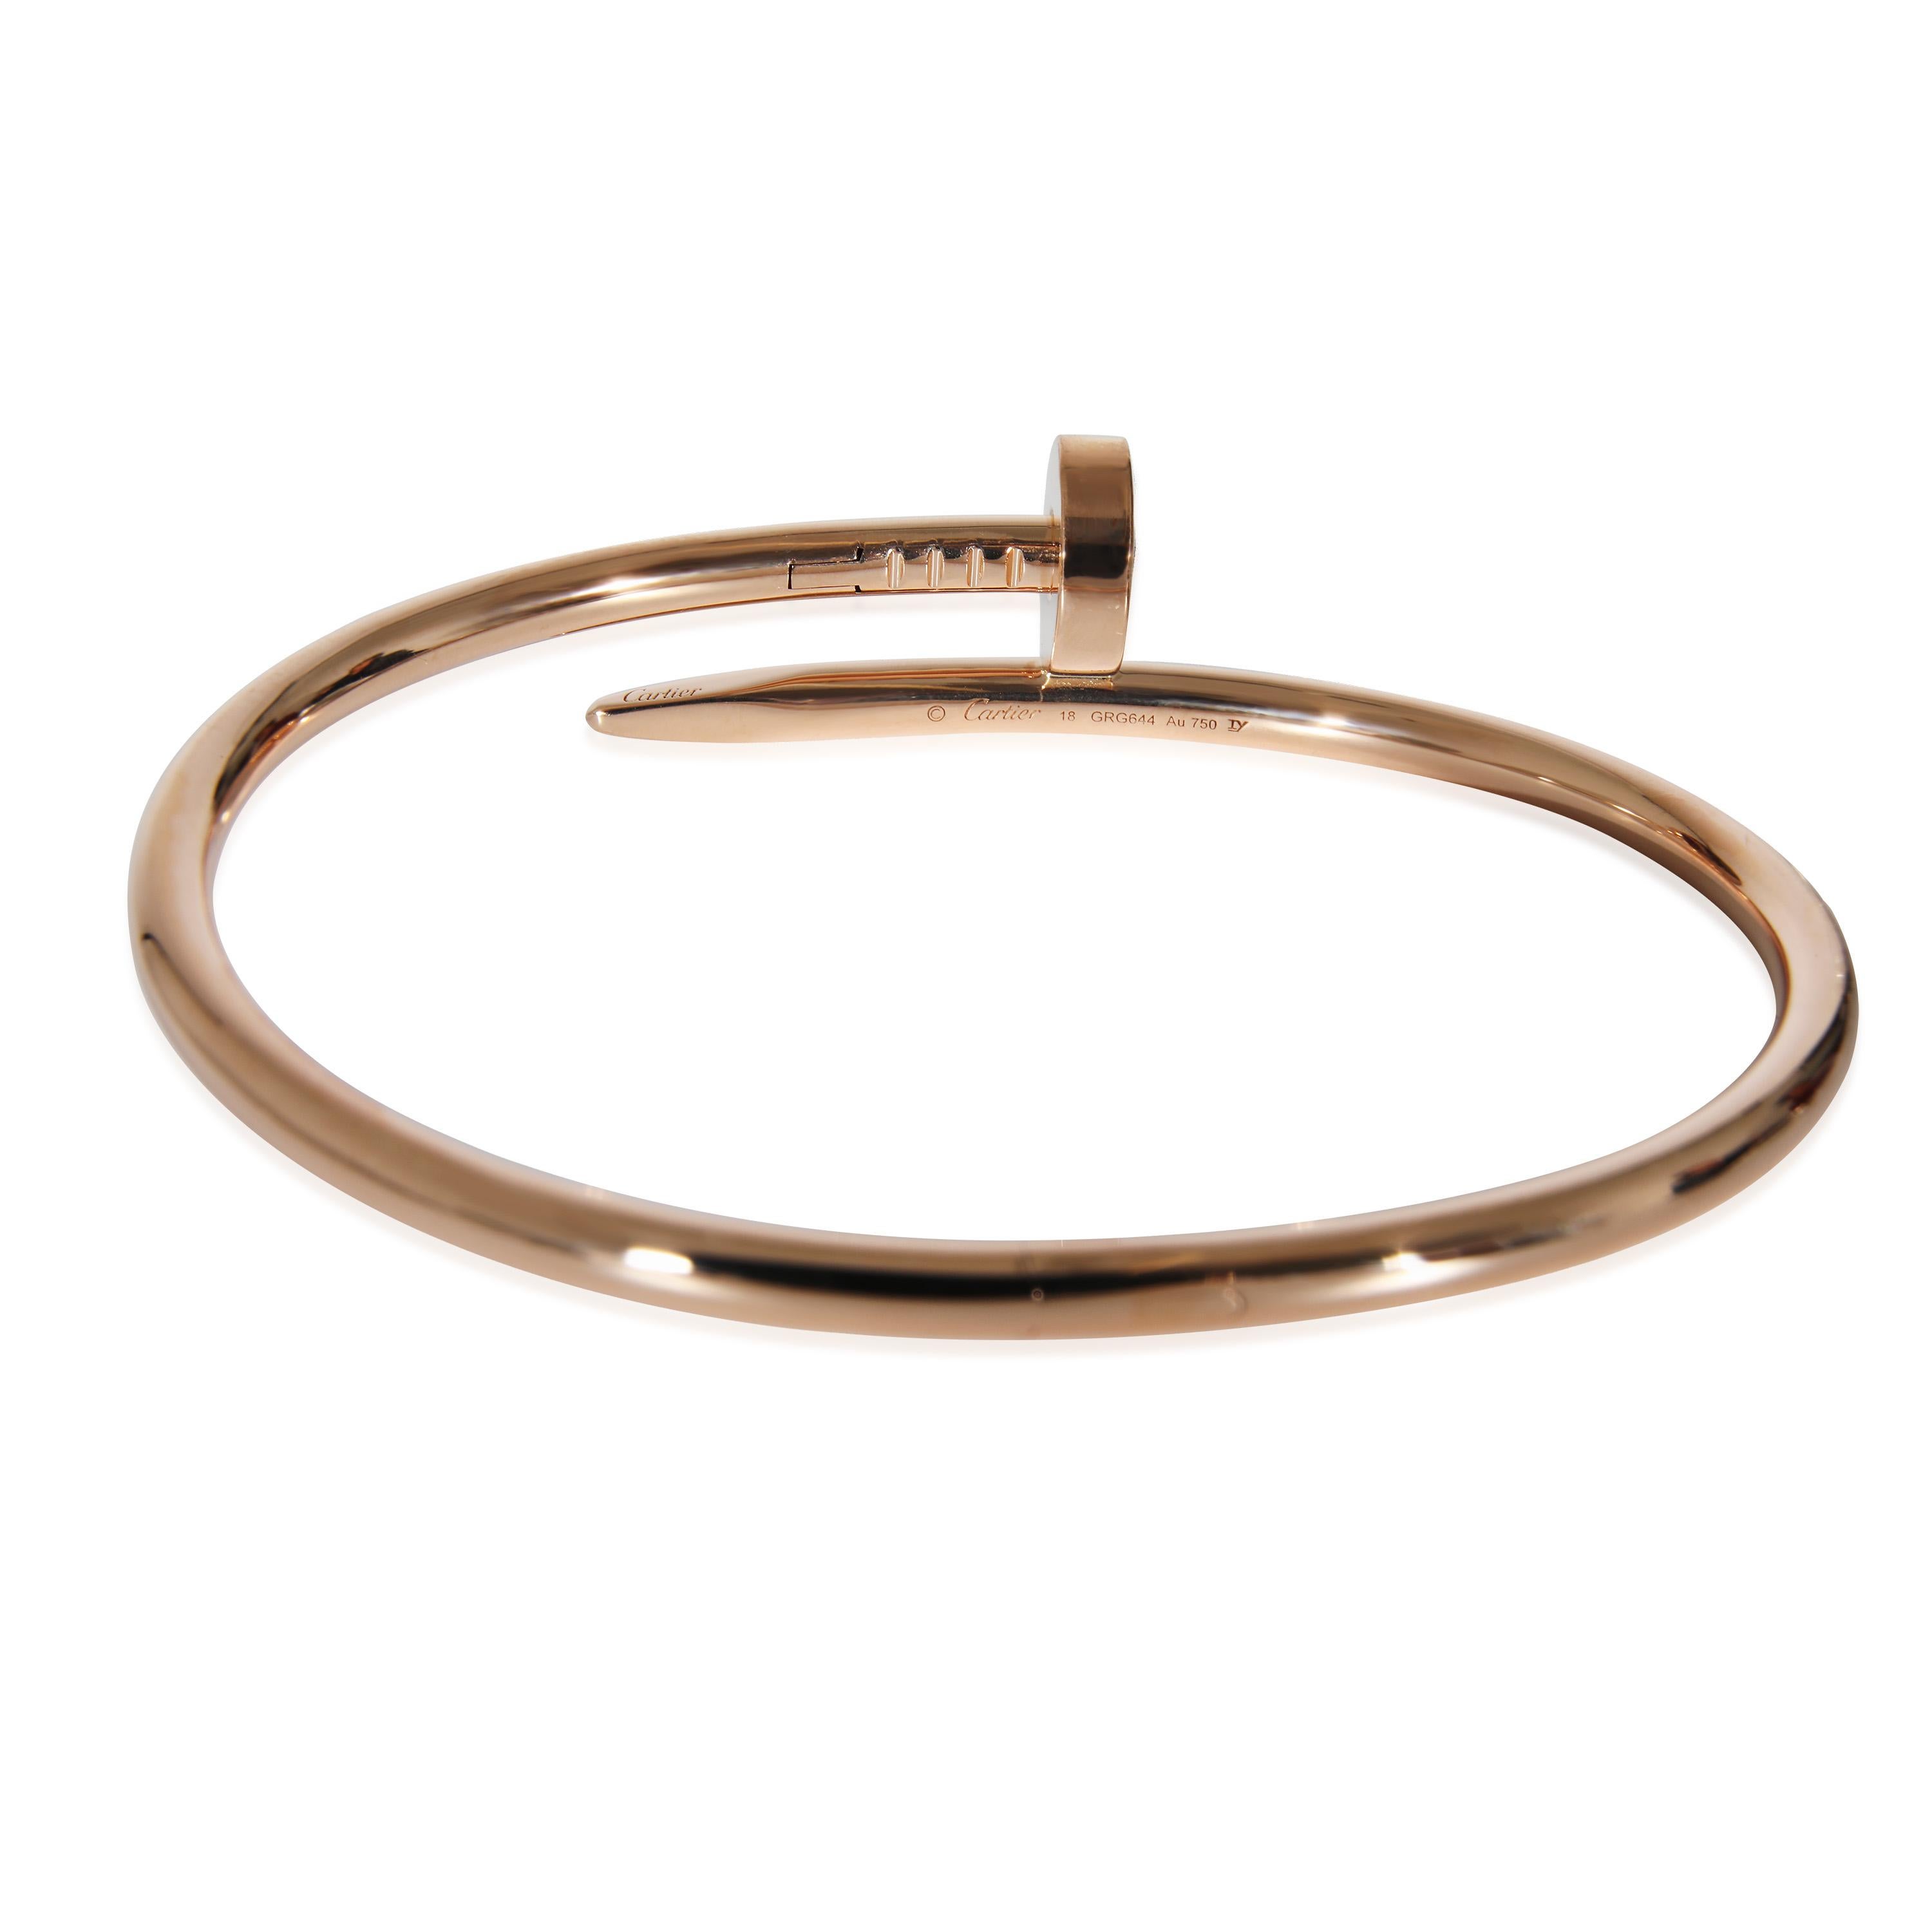 Cartier Juste un Clou Bracelet in 18K Rose Gold

PRIMARY DETAILS
SKU: 133740
Listing Title: Cartier Juste un Clou Bracelet in 18K Rose Gold
Condition Description: Translating to 'just a nail', the Juste Un Clou collection from Cartier is one of the